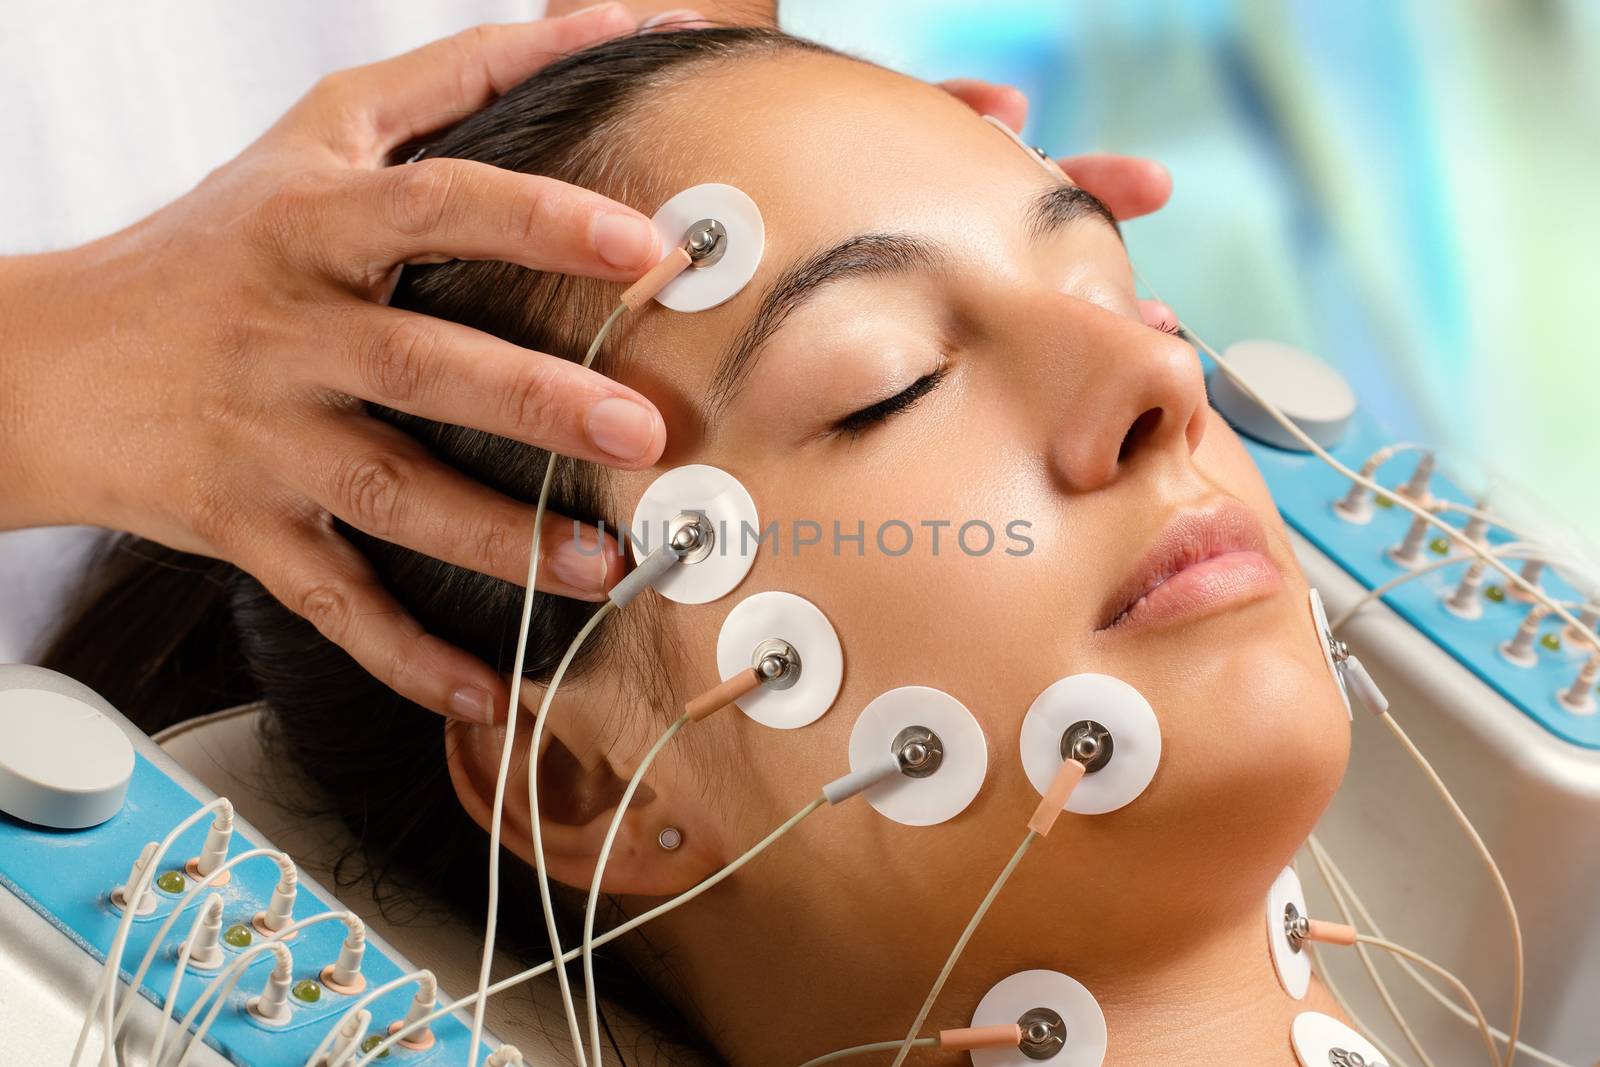 Close up portrait of woman having electrical facial skin tightening treatment.Multiple hypo allergenic pads places on face.
